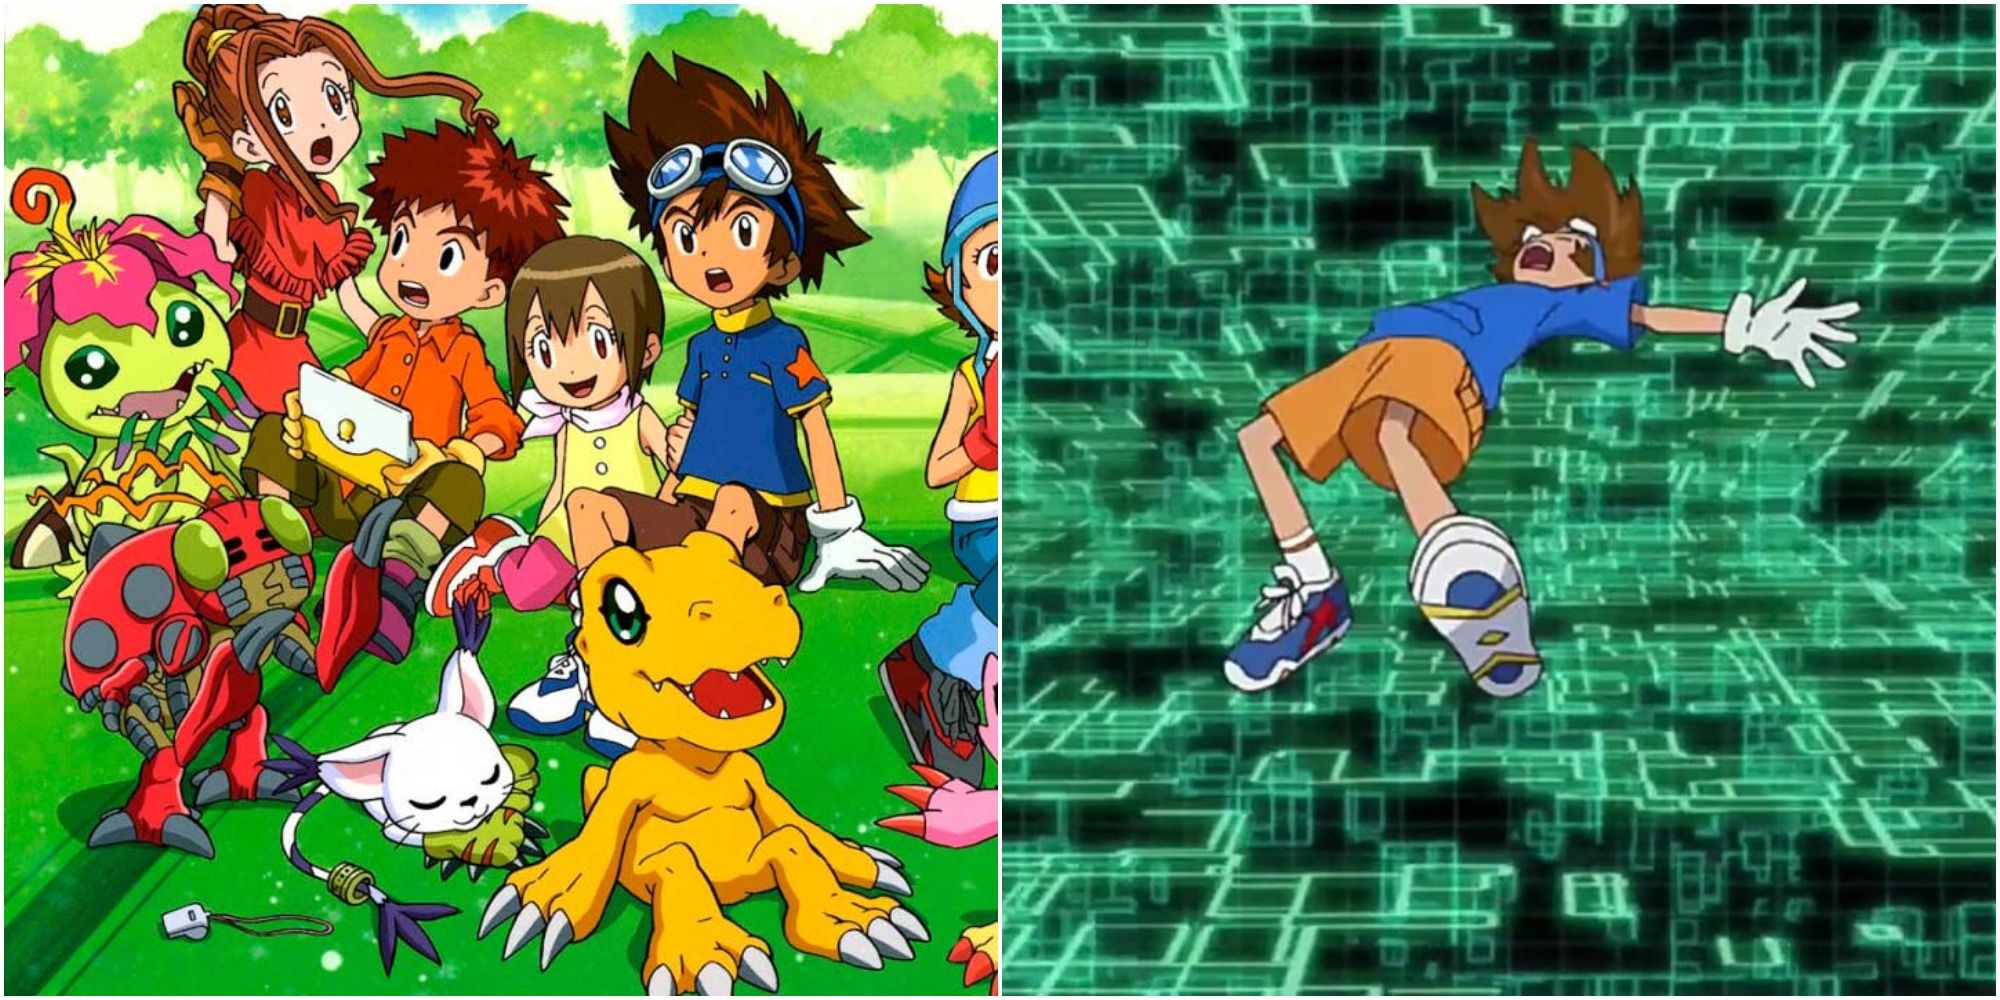 Digimon Adventure: Collage Of The MAin Characters